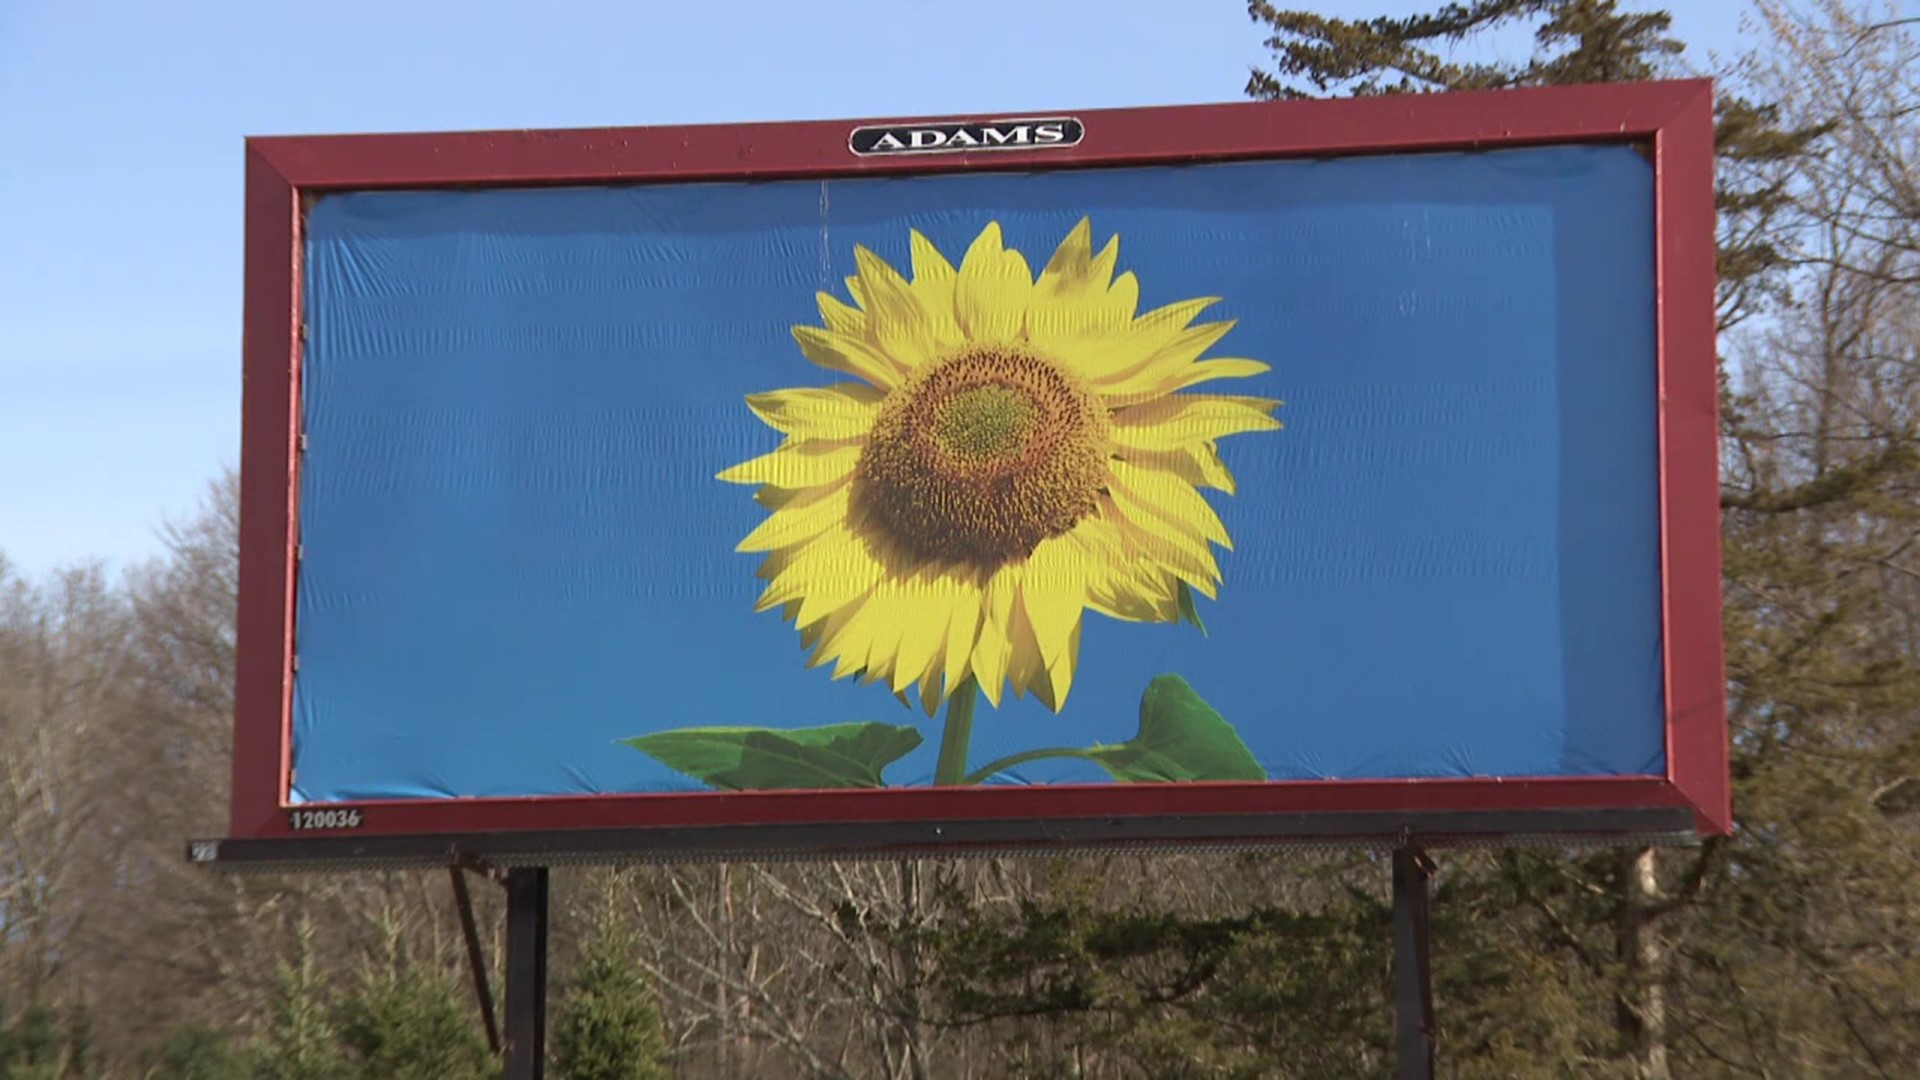 Newswatch 16's Amanda Eustice shows us the company's subtle nod to the people of Ukraine.